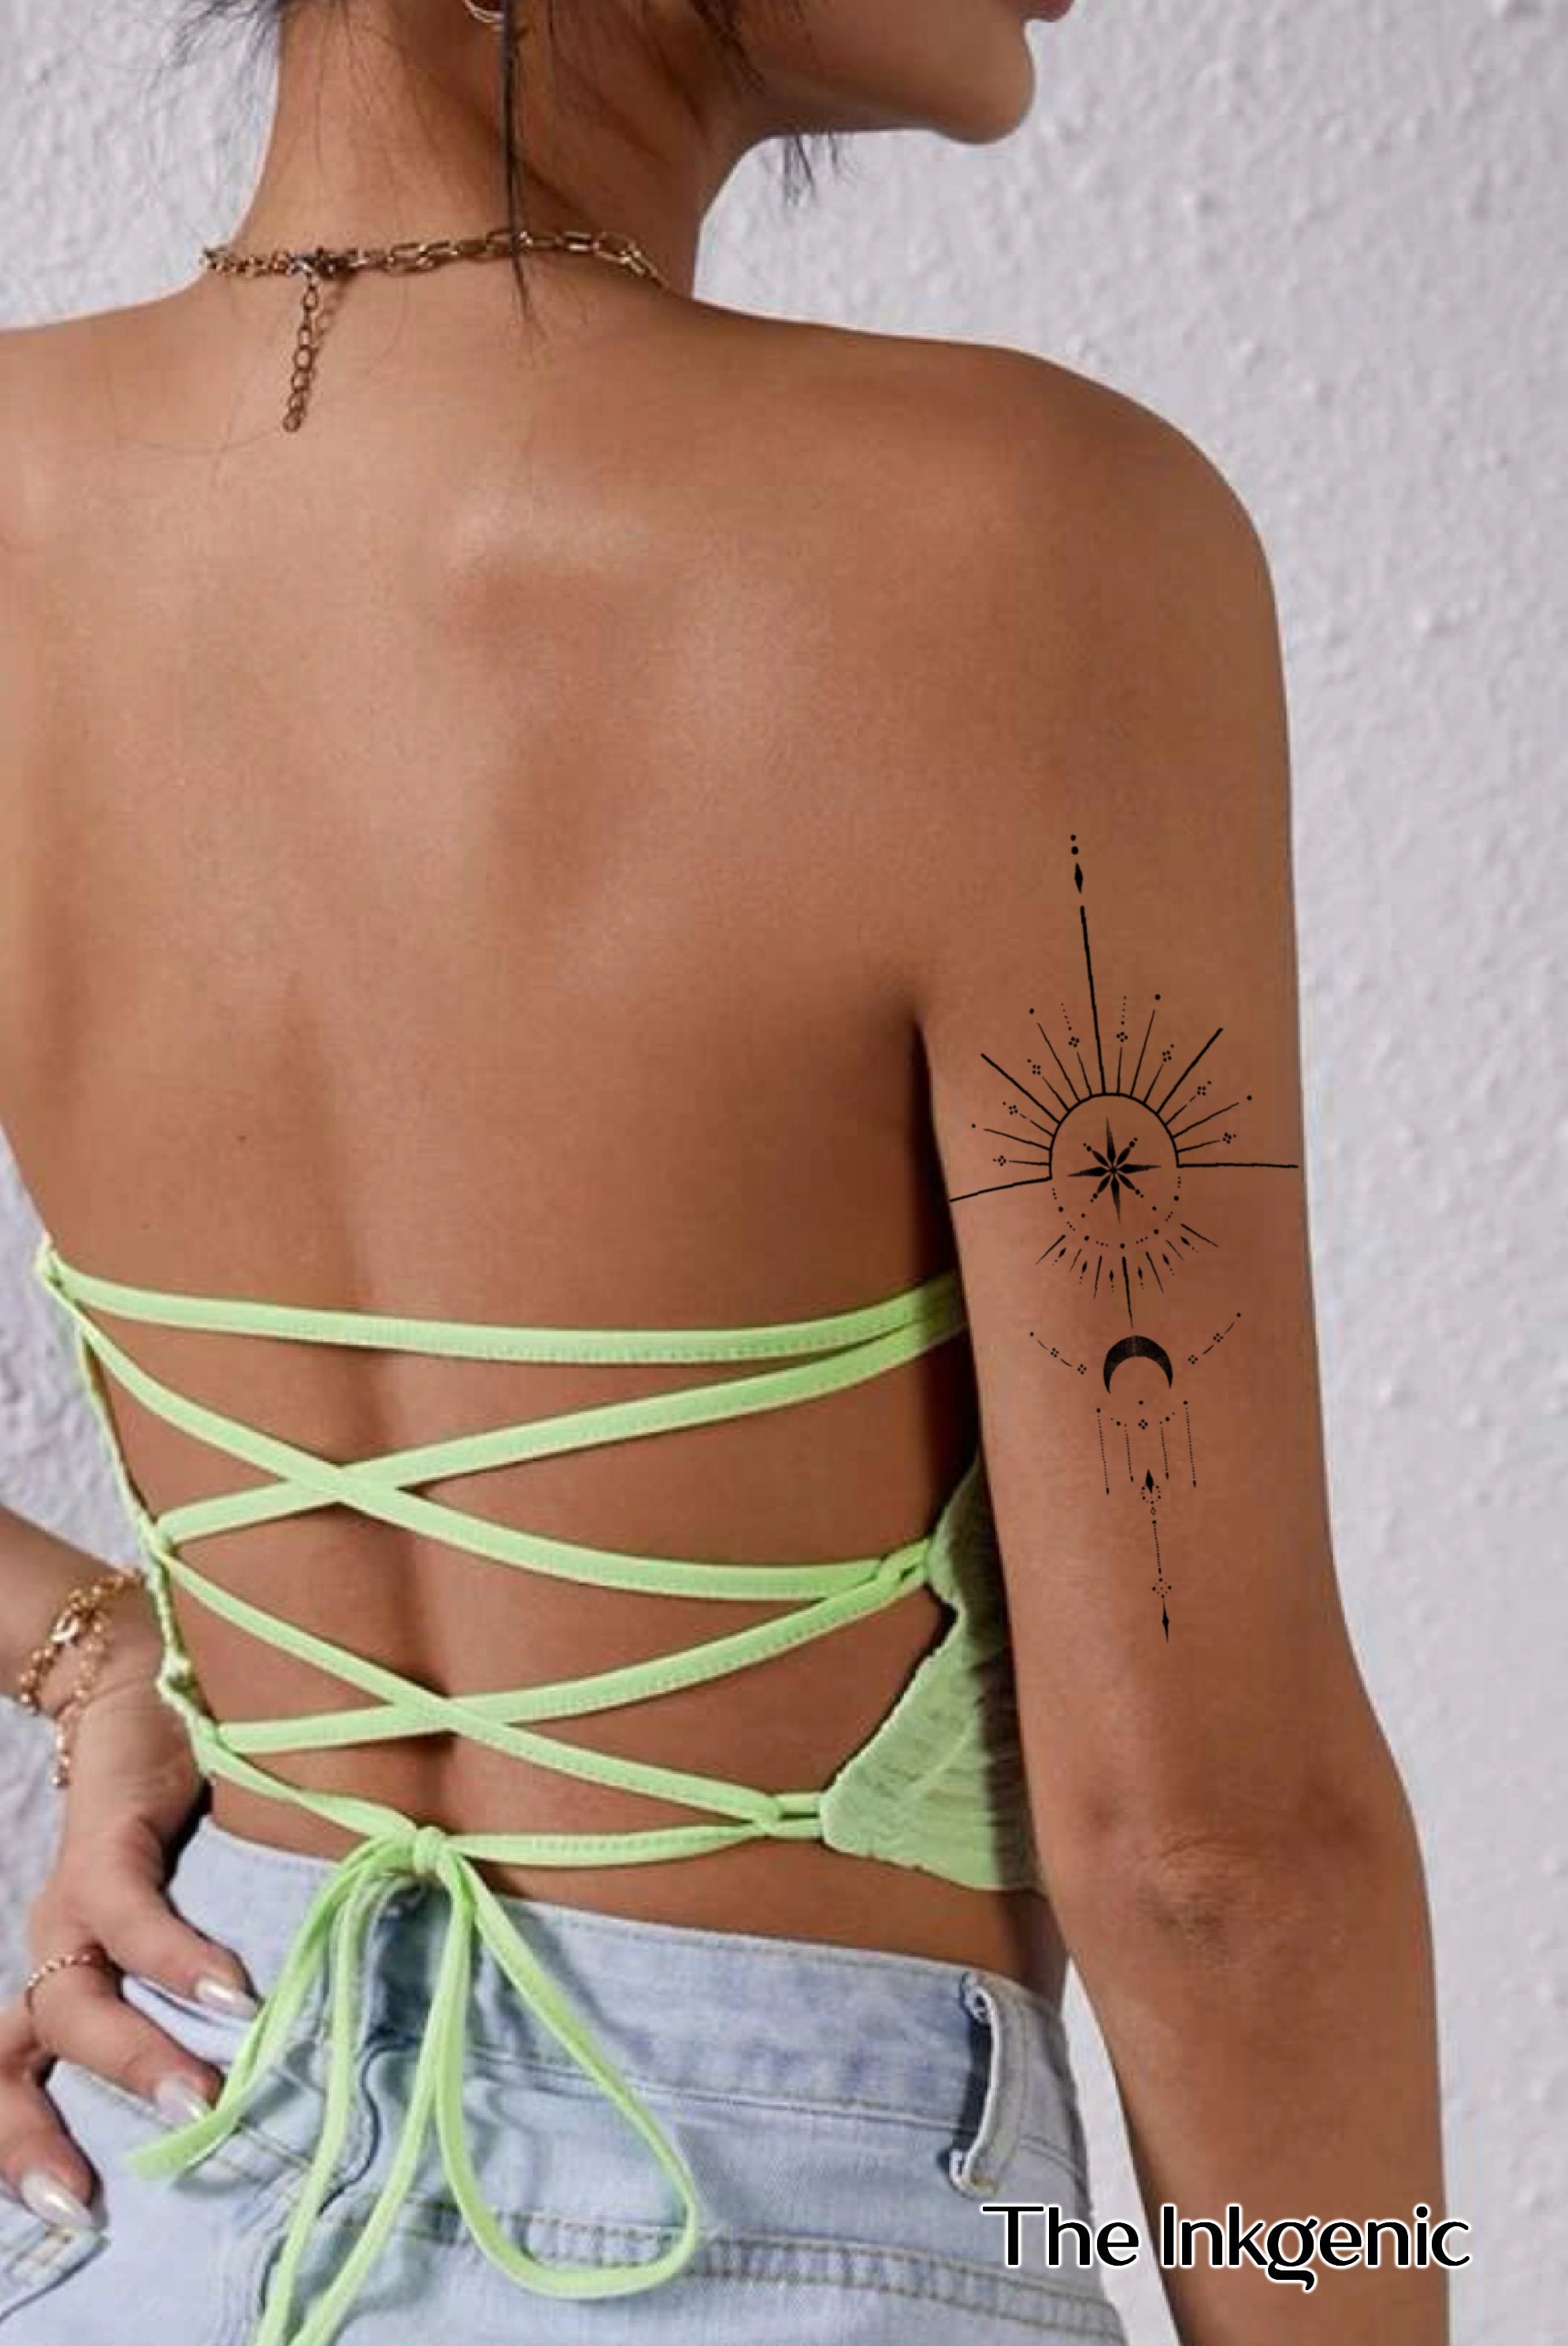 15 Amazing Sun Tattoo Designs With Meanings | Sun tattoo designs, Sun  tattoos, Sun tattoo